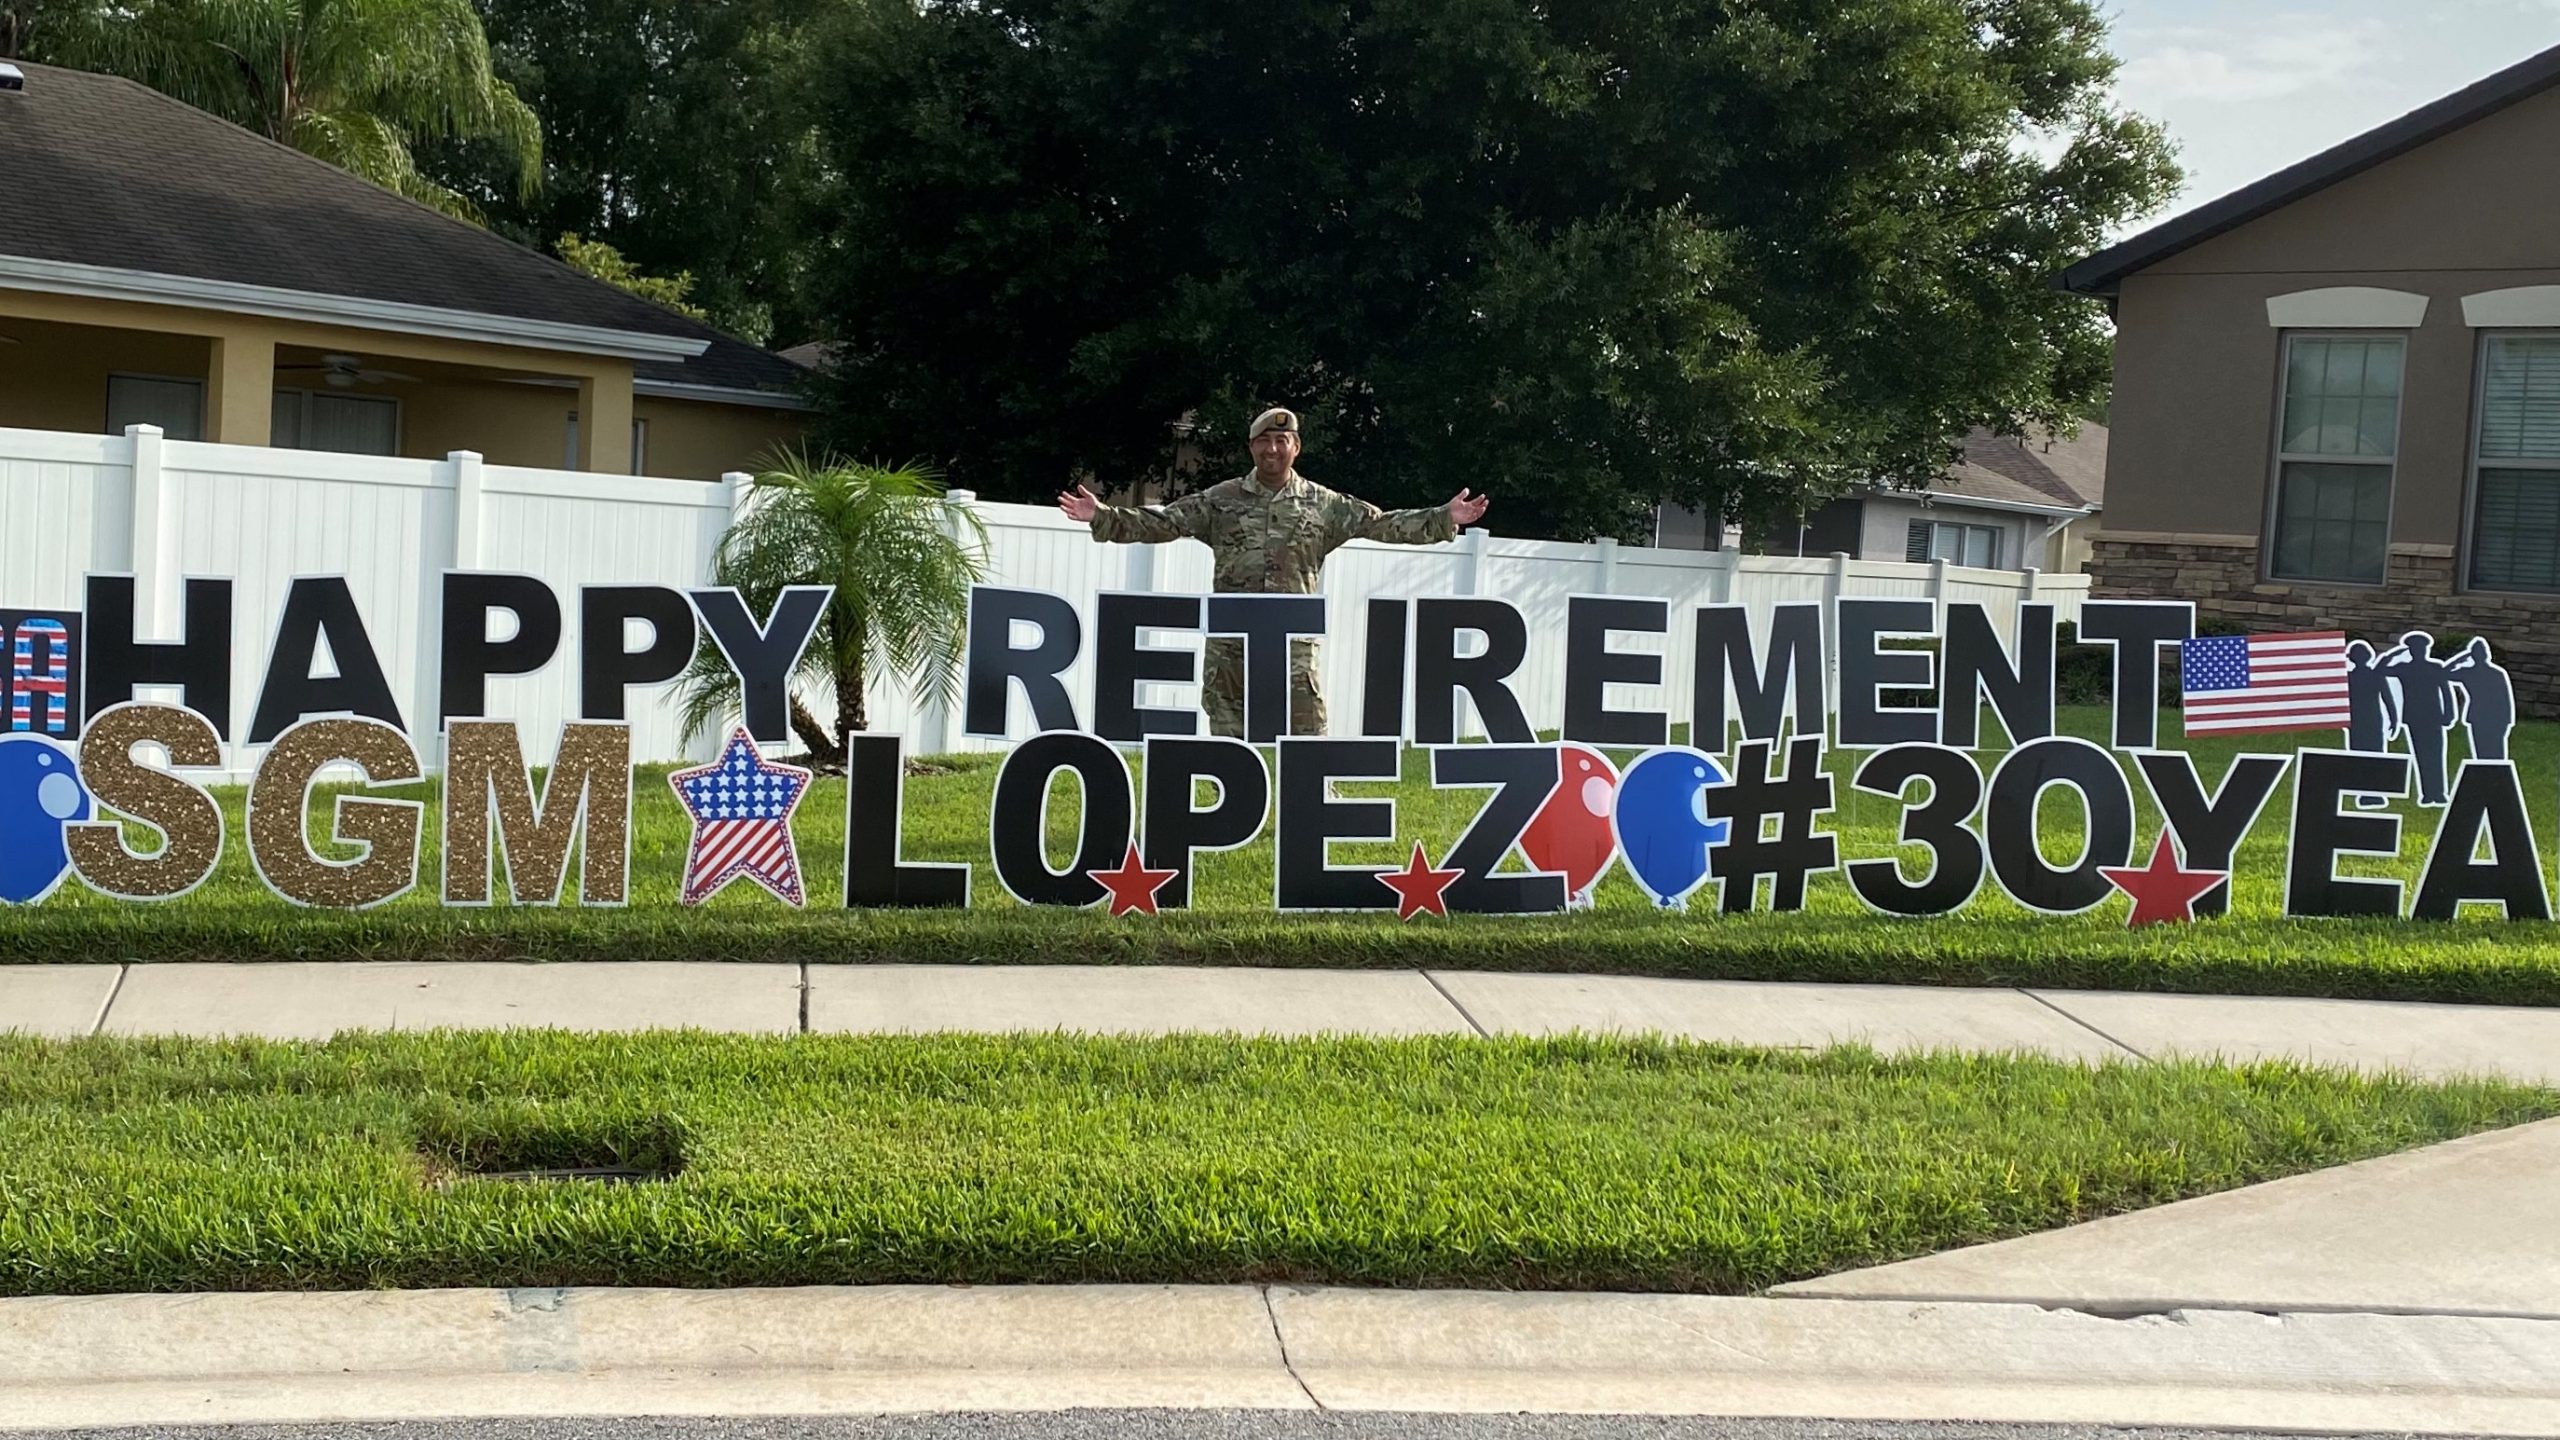 Sergeant Major Danny Lopez’s Farewell to Spathe Systems